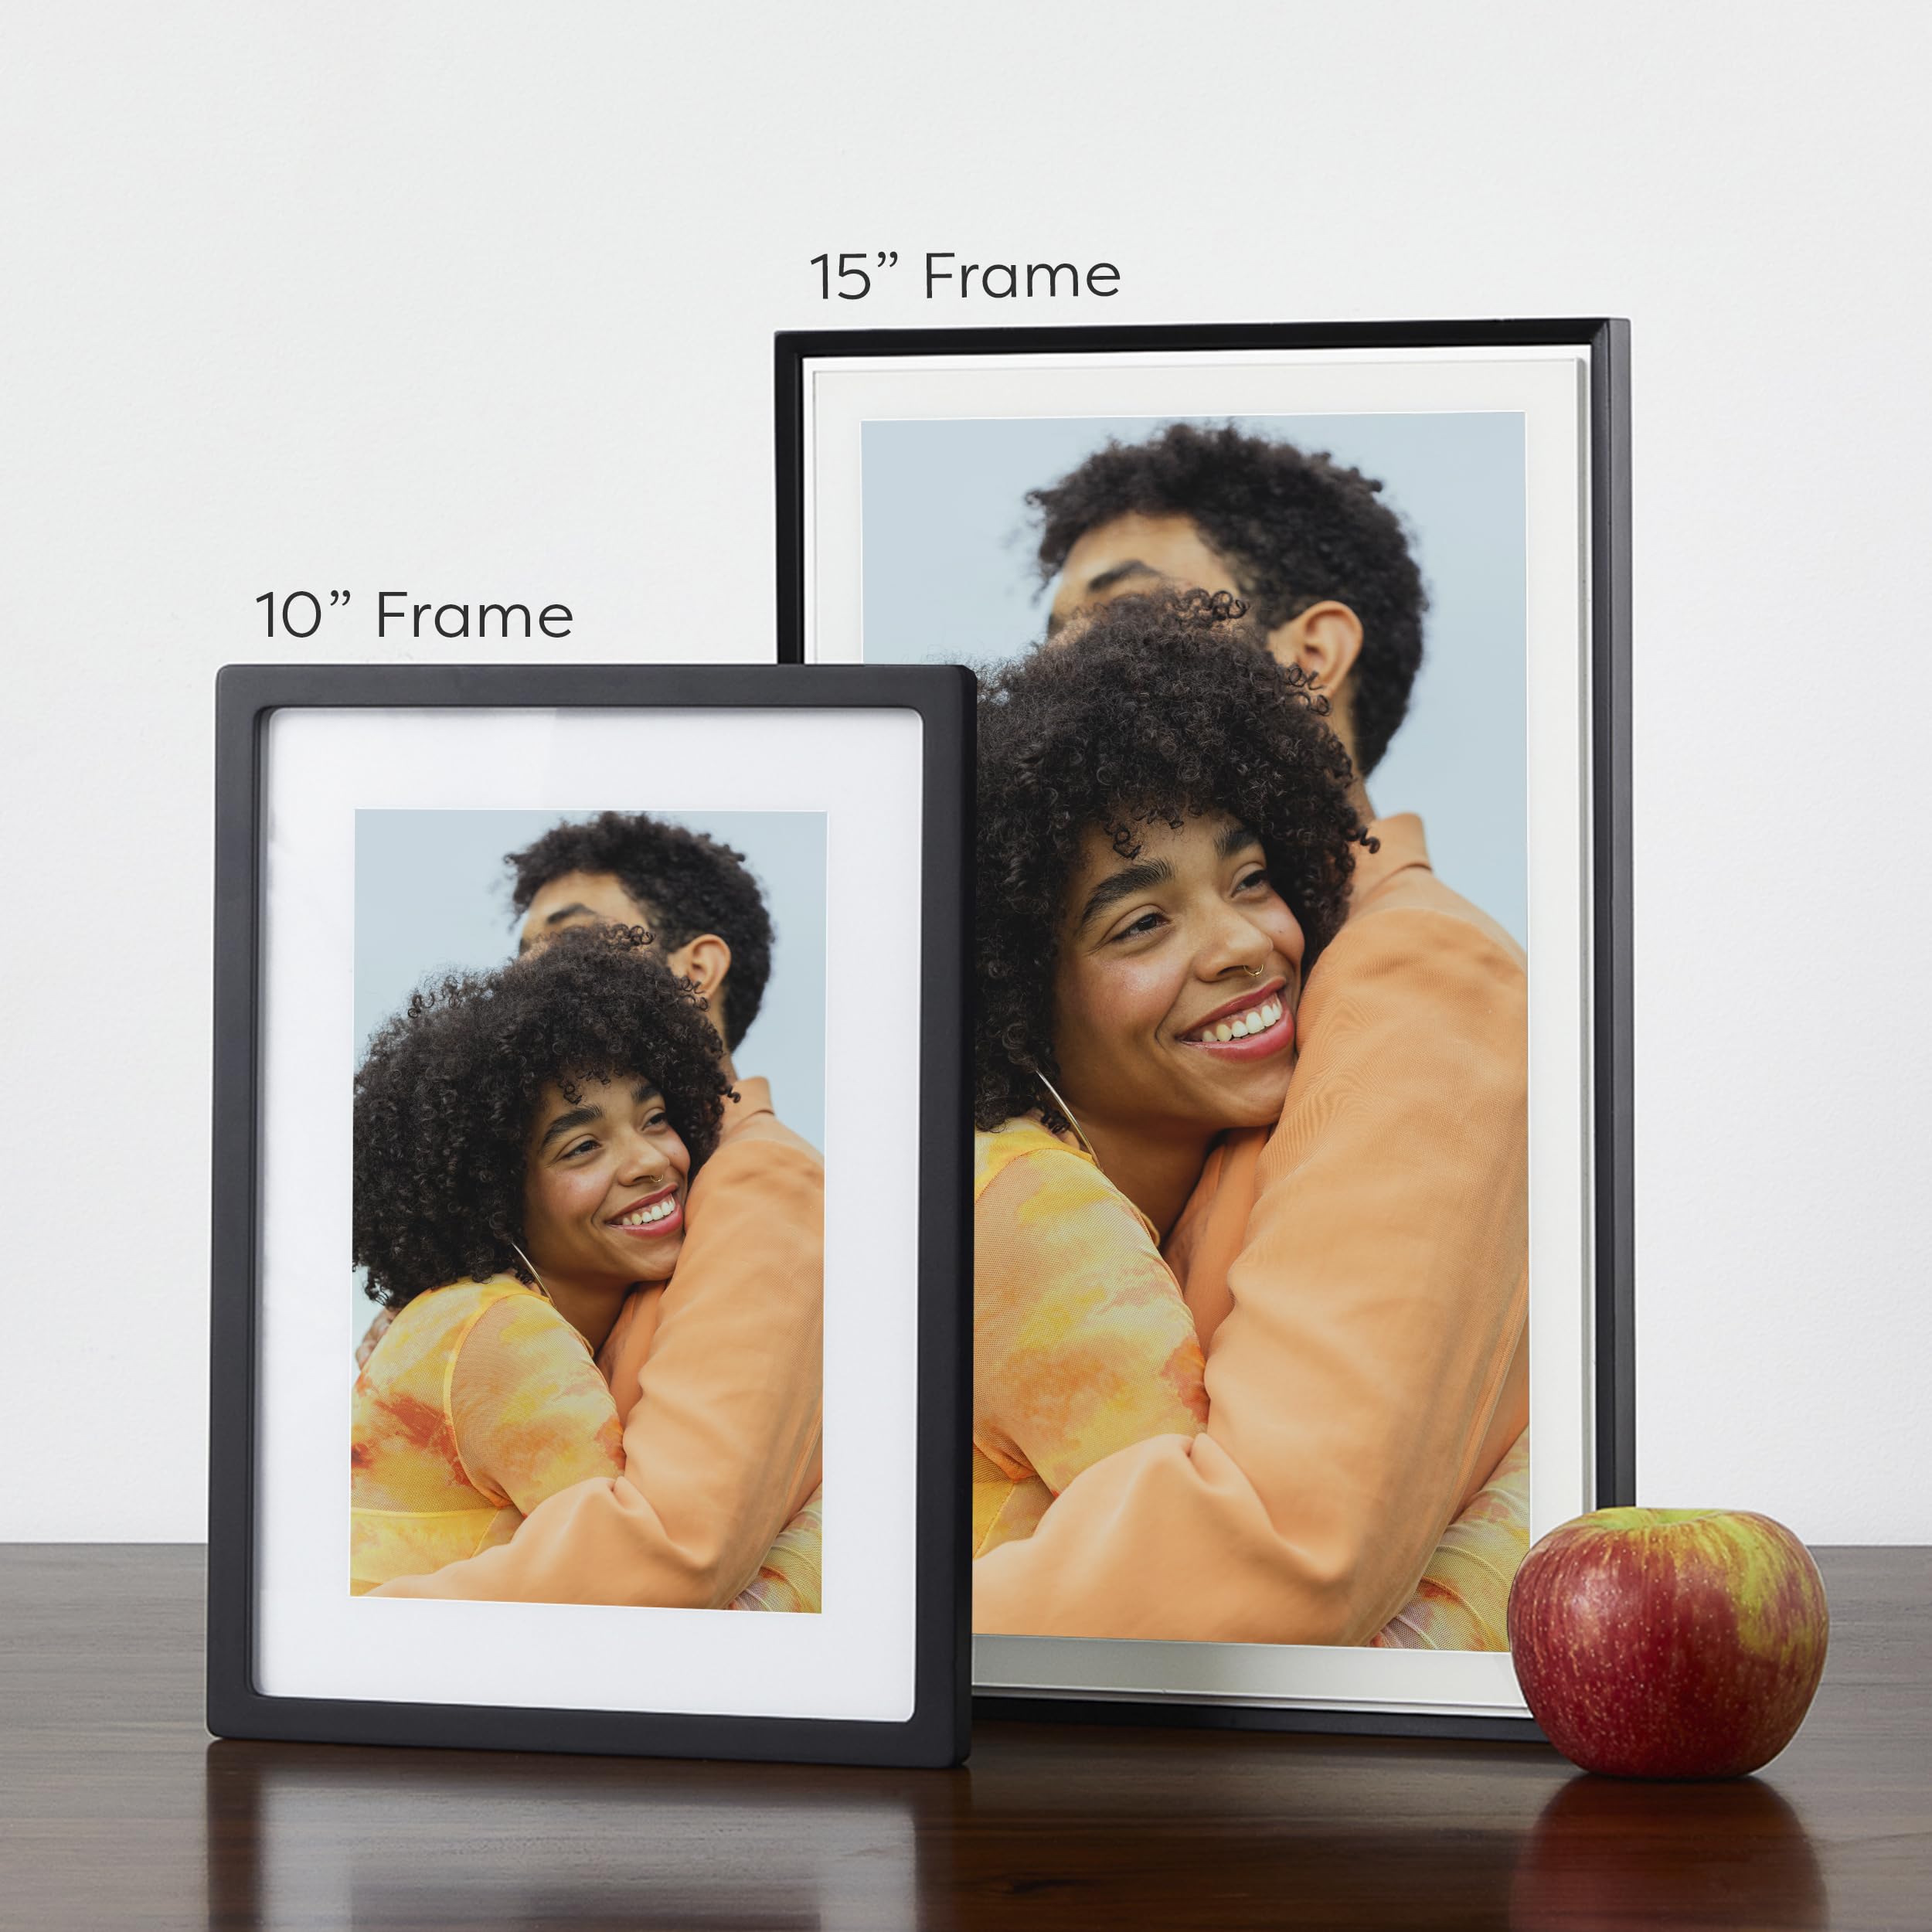 Skylight Frame: 10 inch WiFi Digital Picture Frame with Load from Phone Capability, Touch Screen Digital Photo Frame Display - Gift for Friends and Family